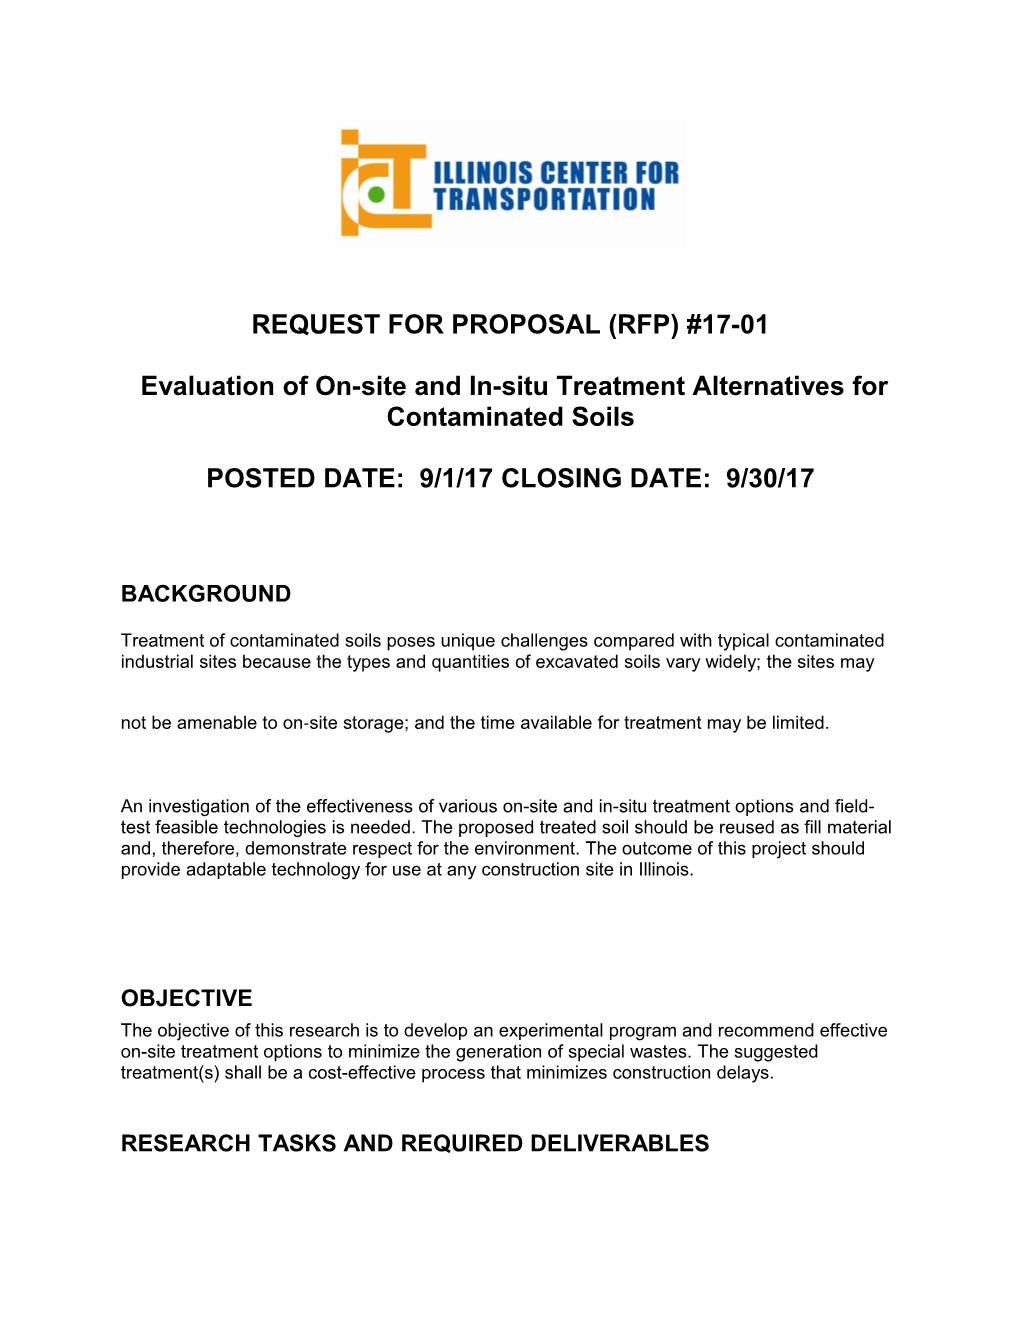 Request for Proposal (Rfp) #17-01